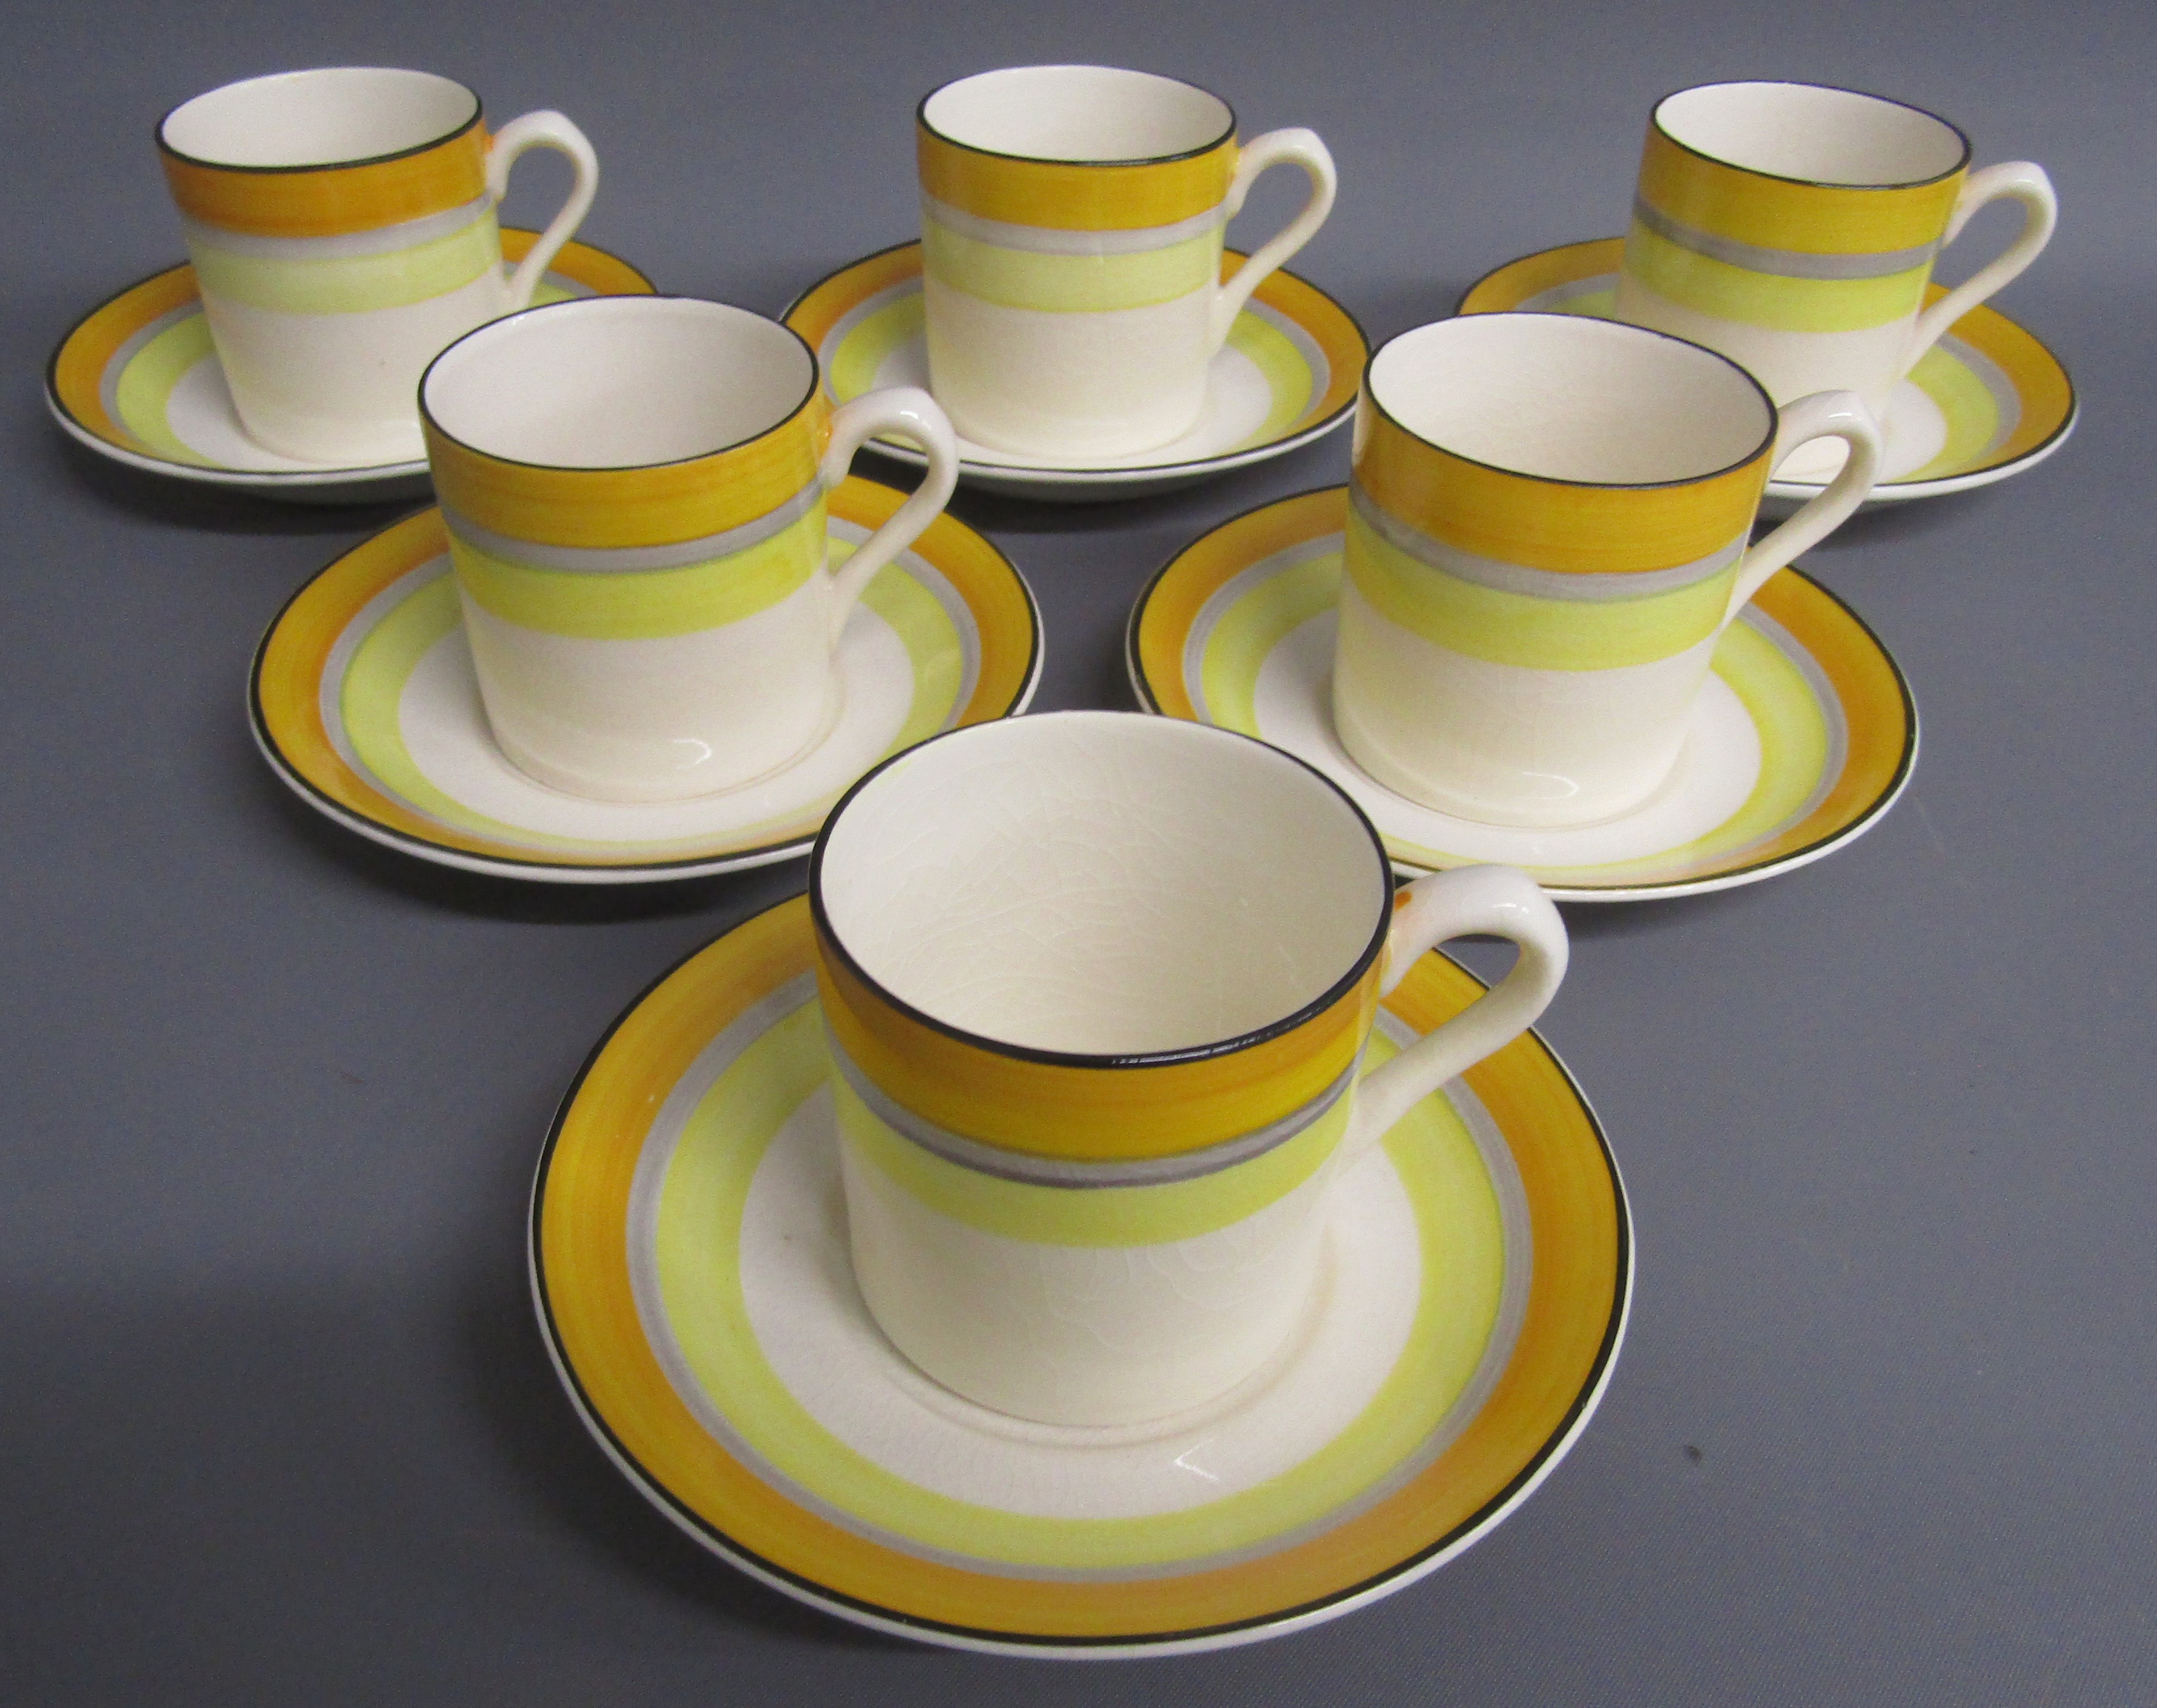 Old Foley Oregon Pine soup bowls and saucers, Susie Cooper hand painted cups, Gray's Pottery - Image 6 of 9